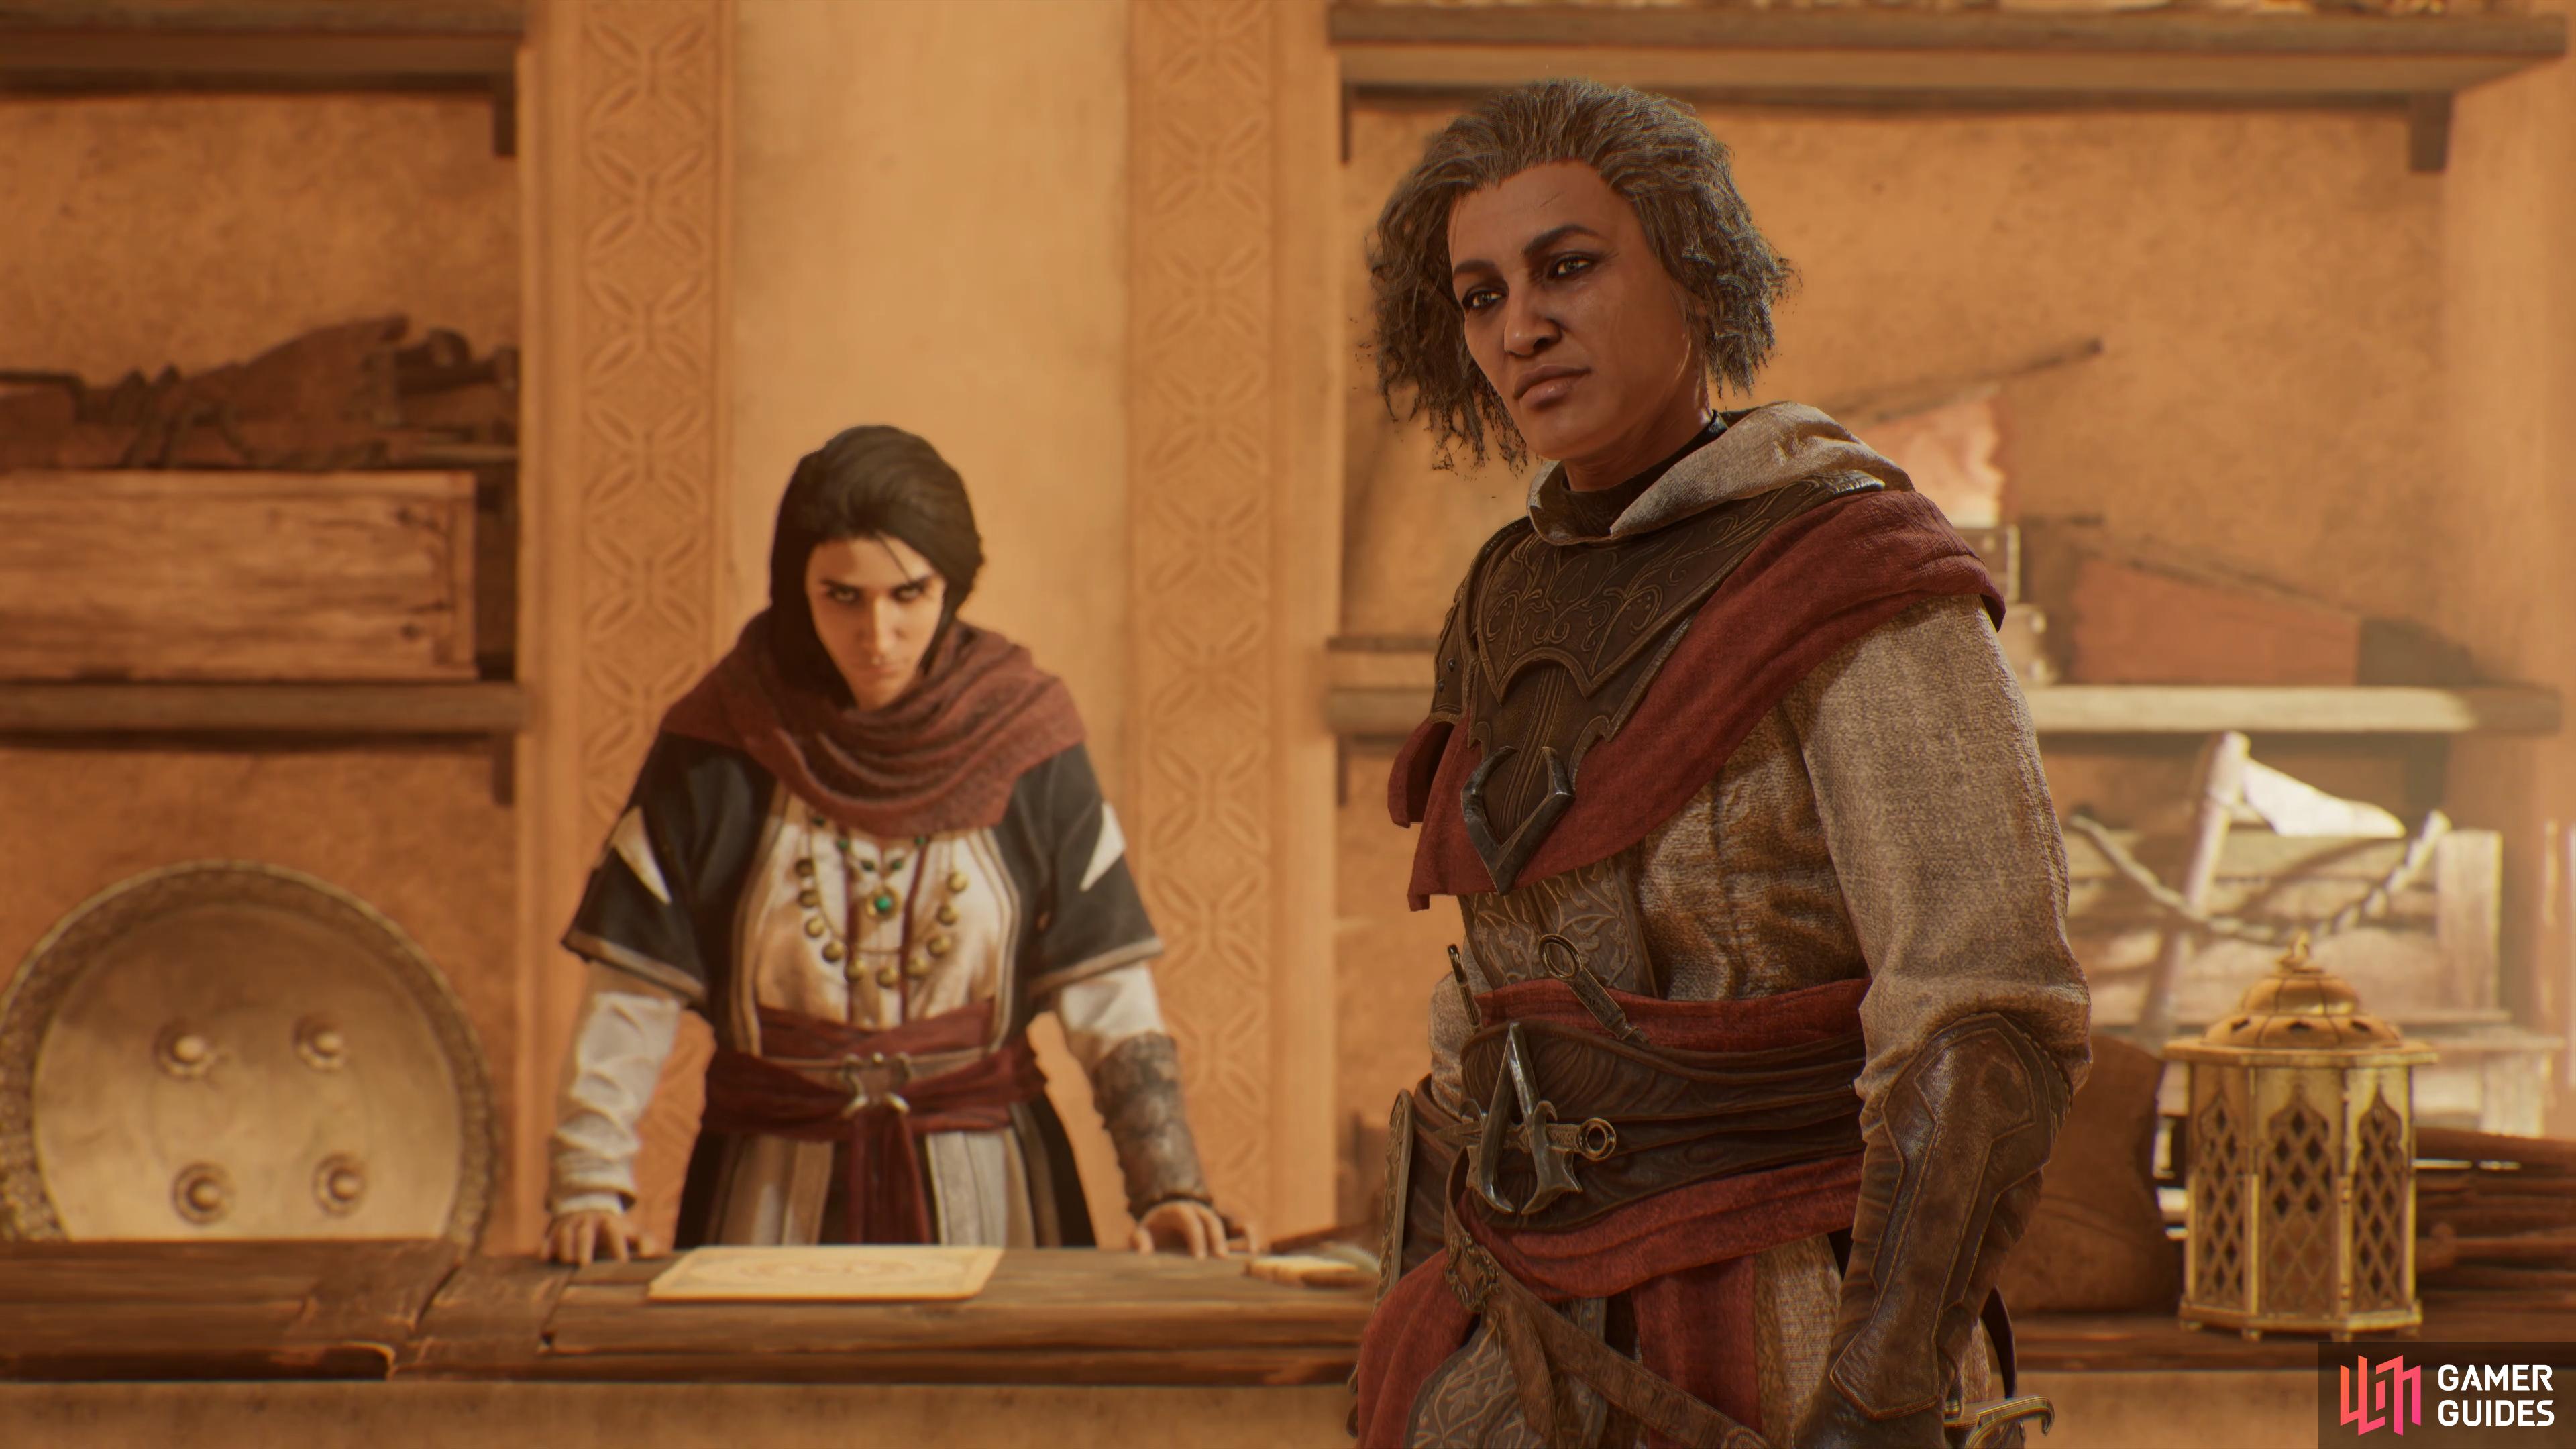 The Al-Anqa investigation in Assassin’s Creed Mirage. Pictured: a demonic Rebekah, and Roshan.